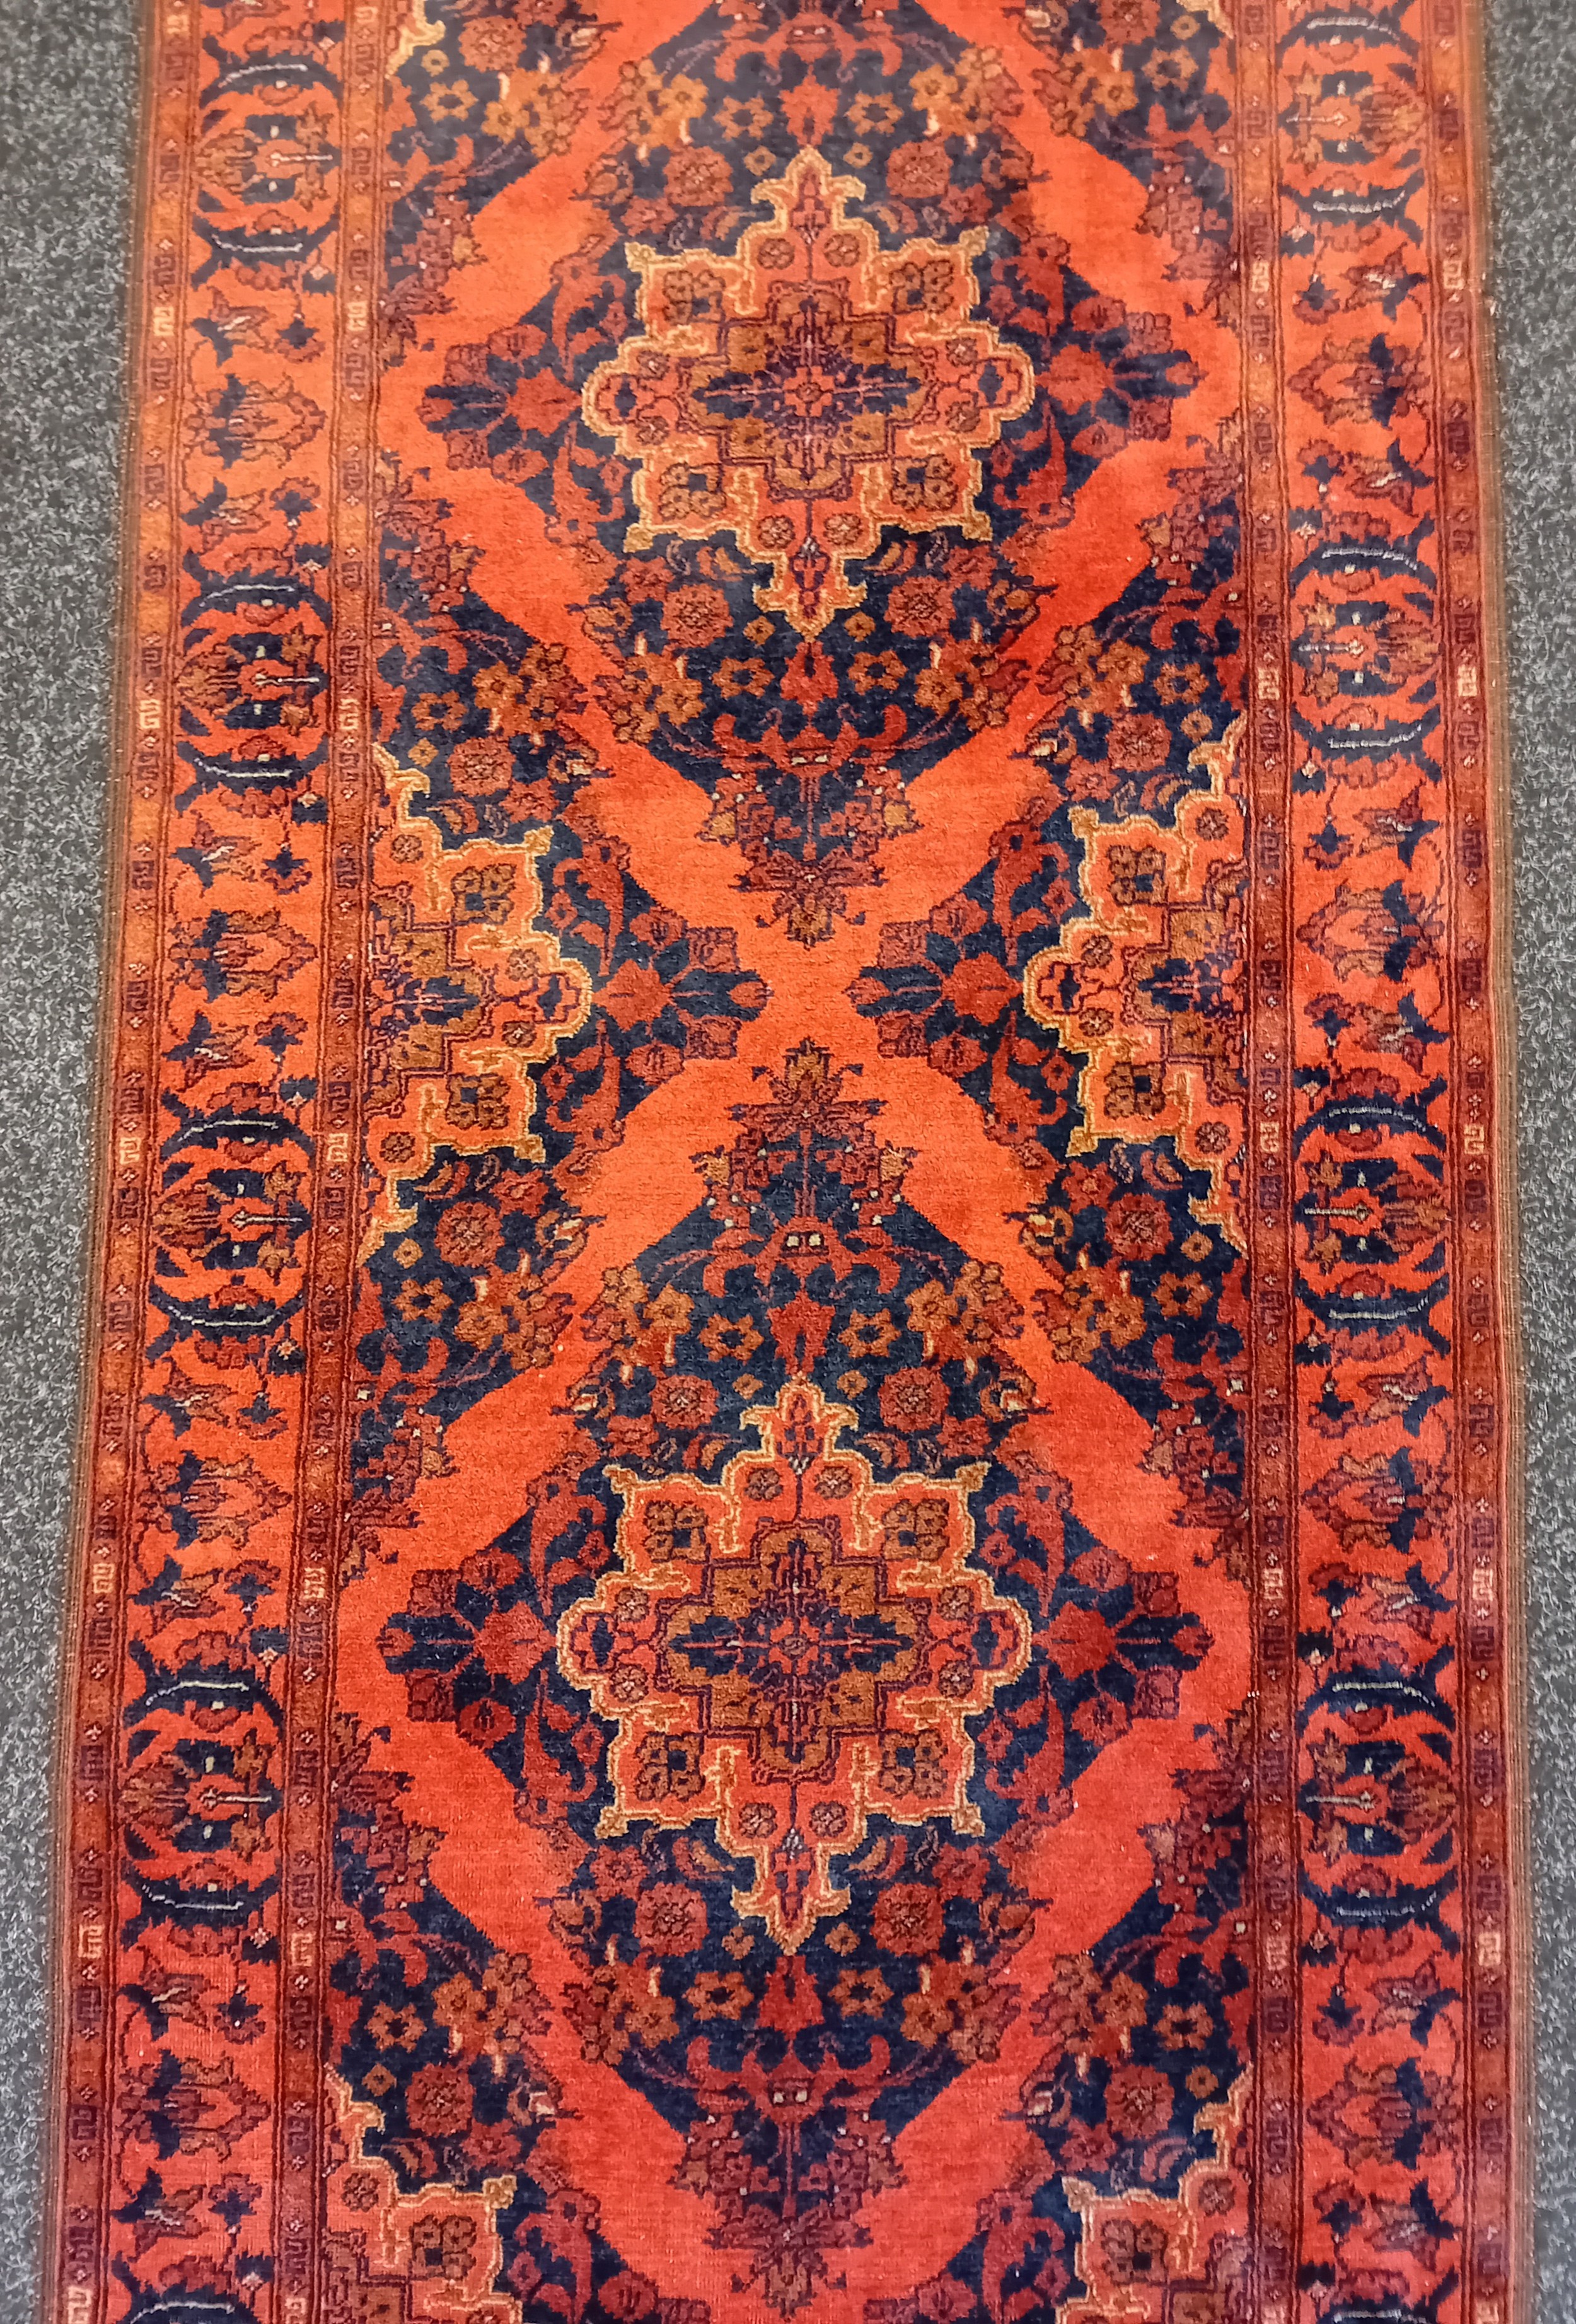 Antique red and blue hall runner [390x95cm] - Image 3 of 3